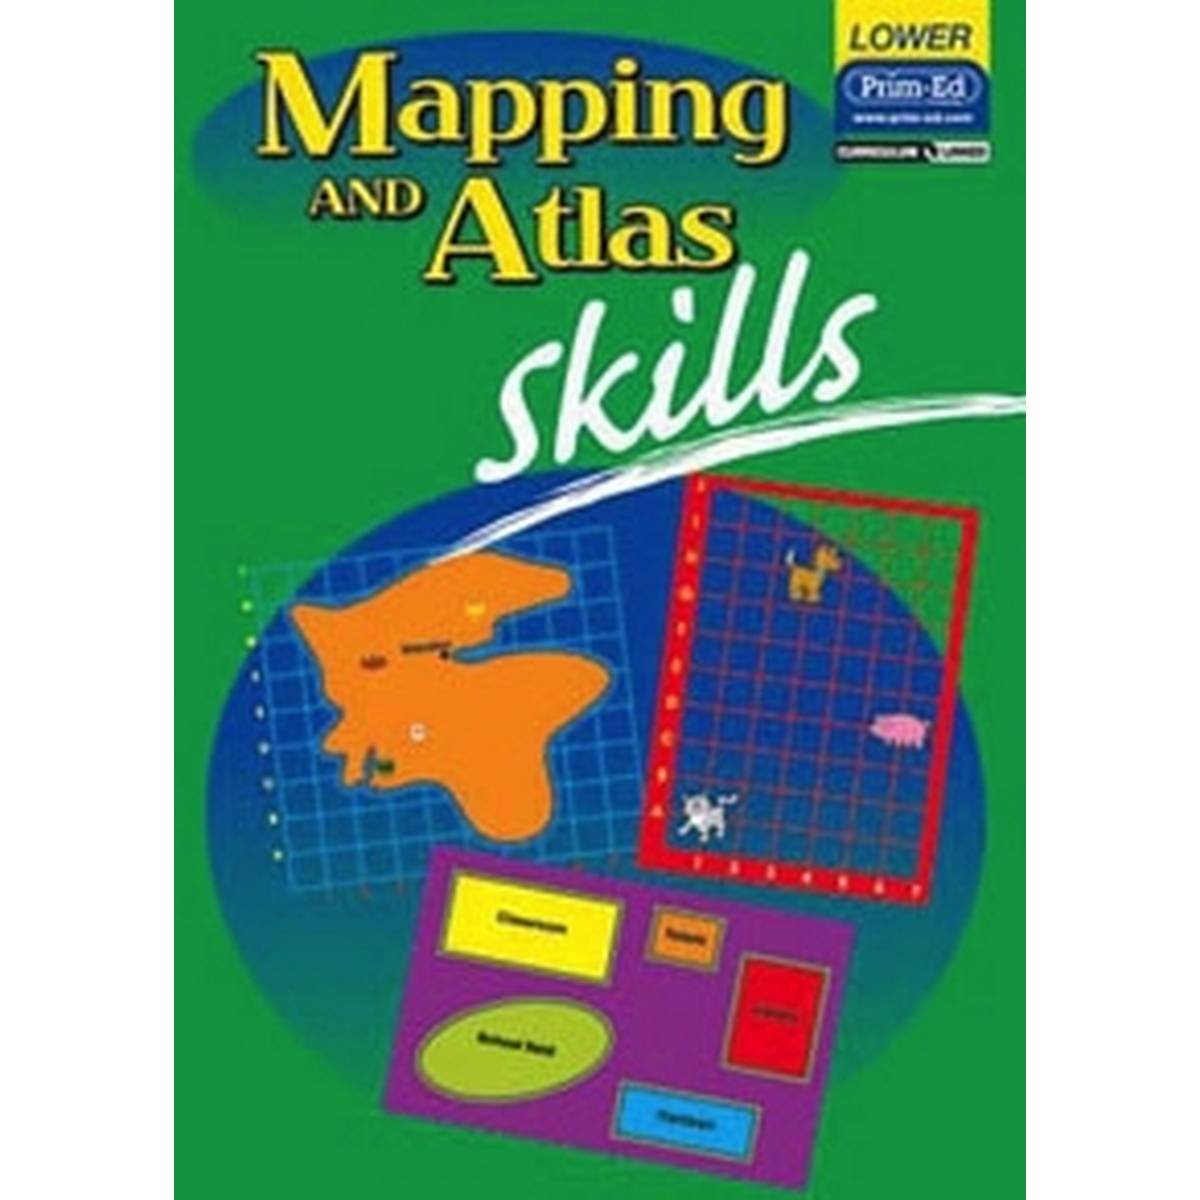 Mapping and Atlas Skills Lower